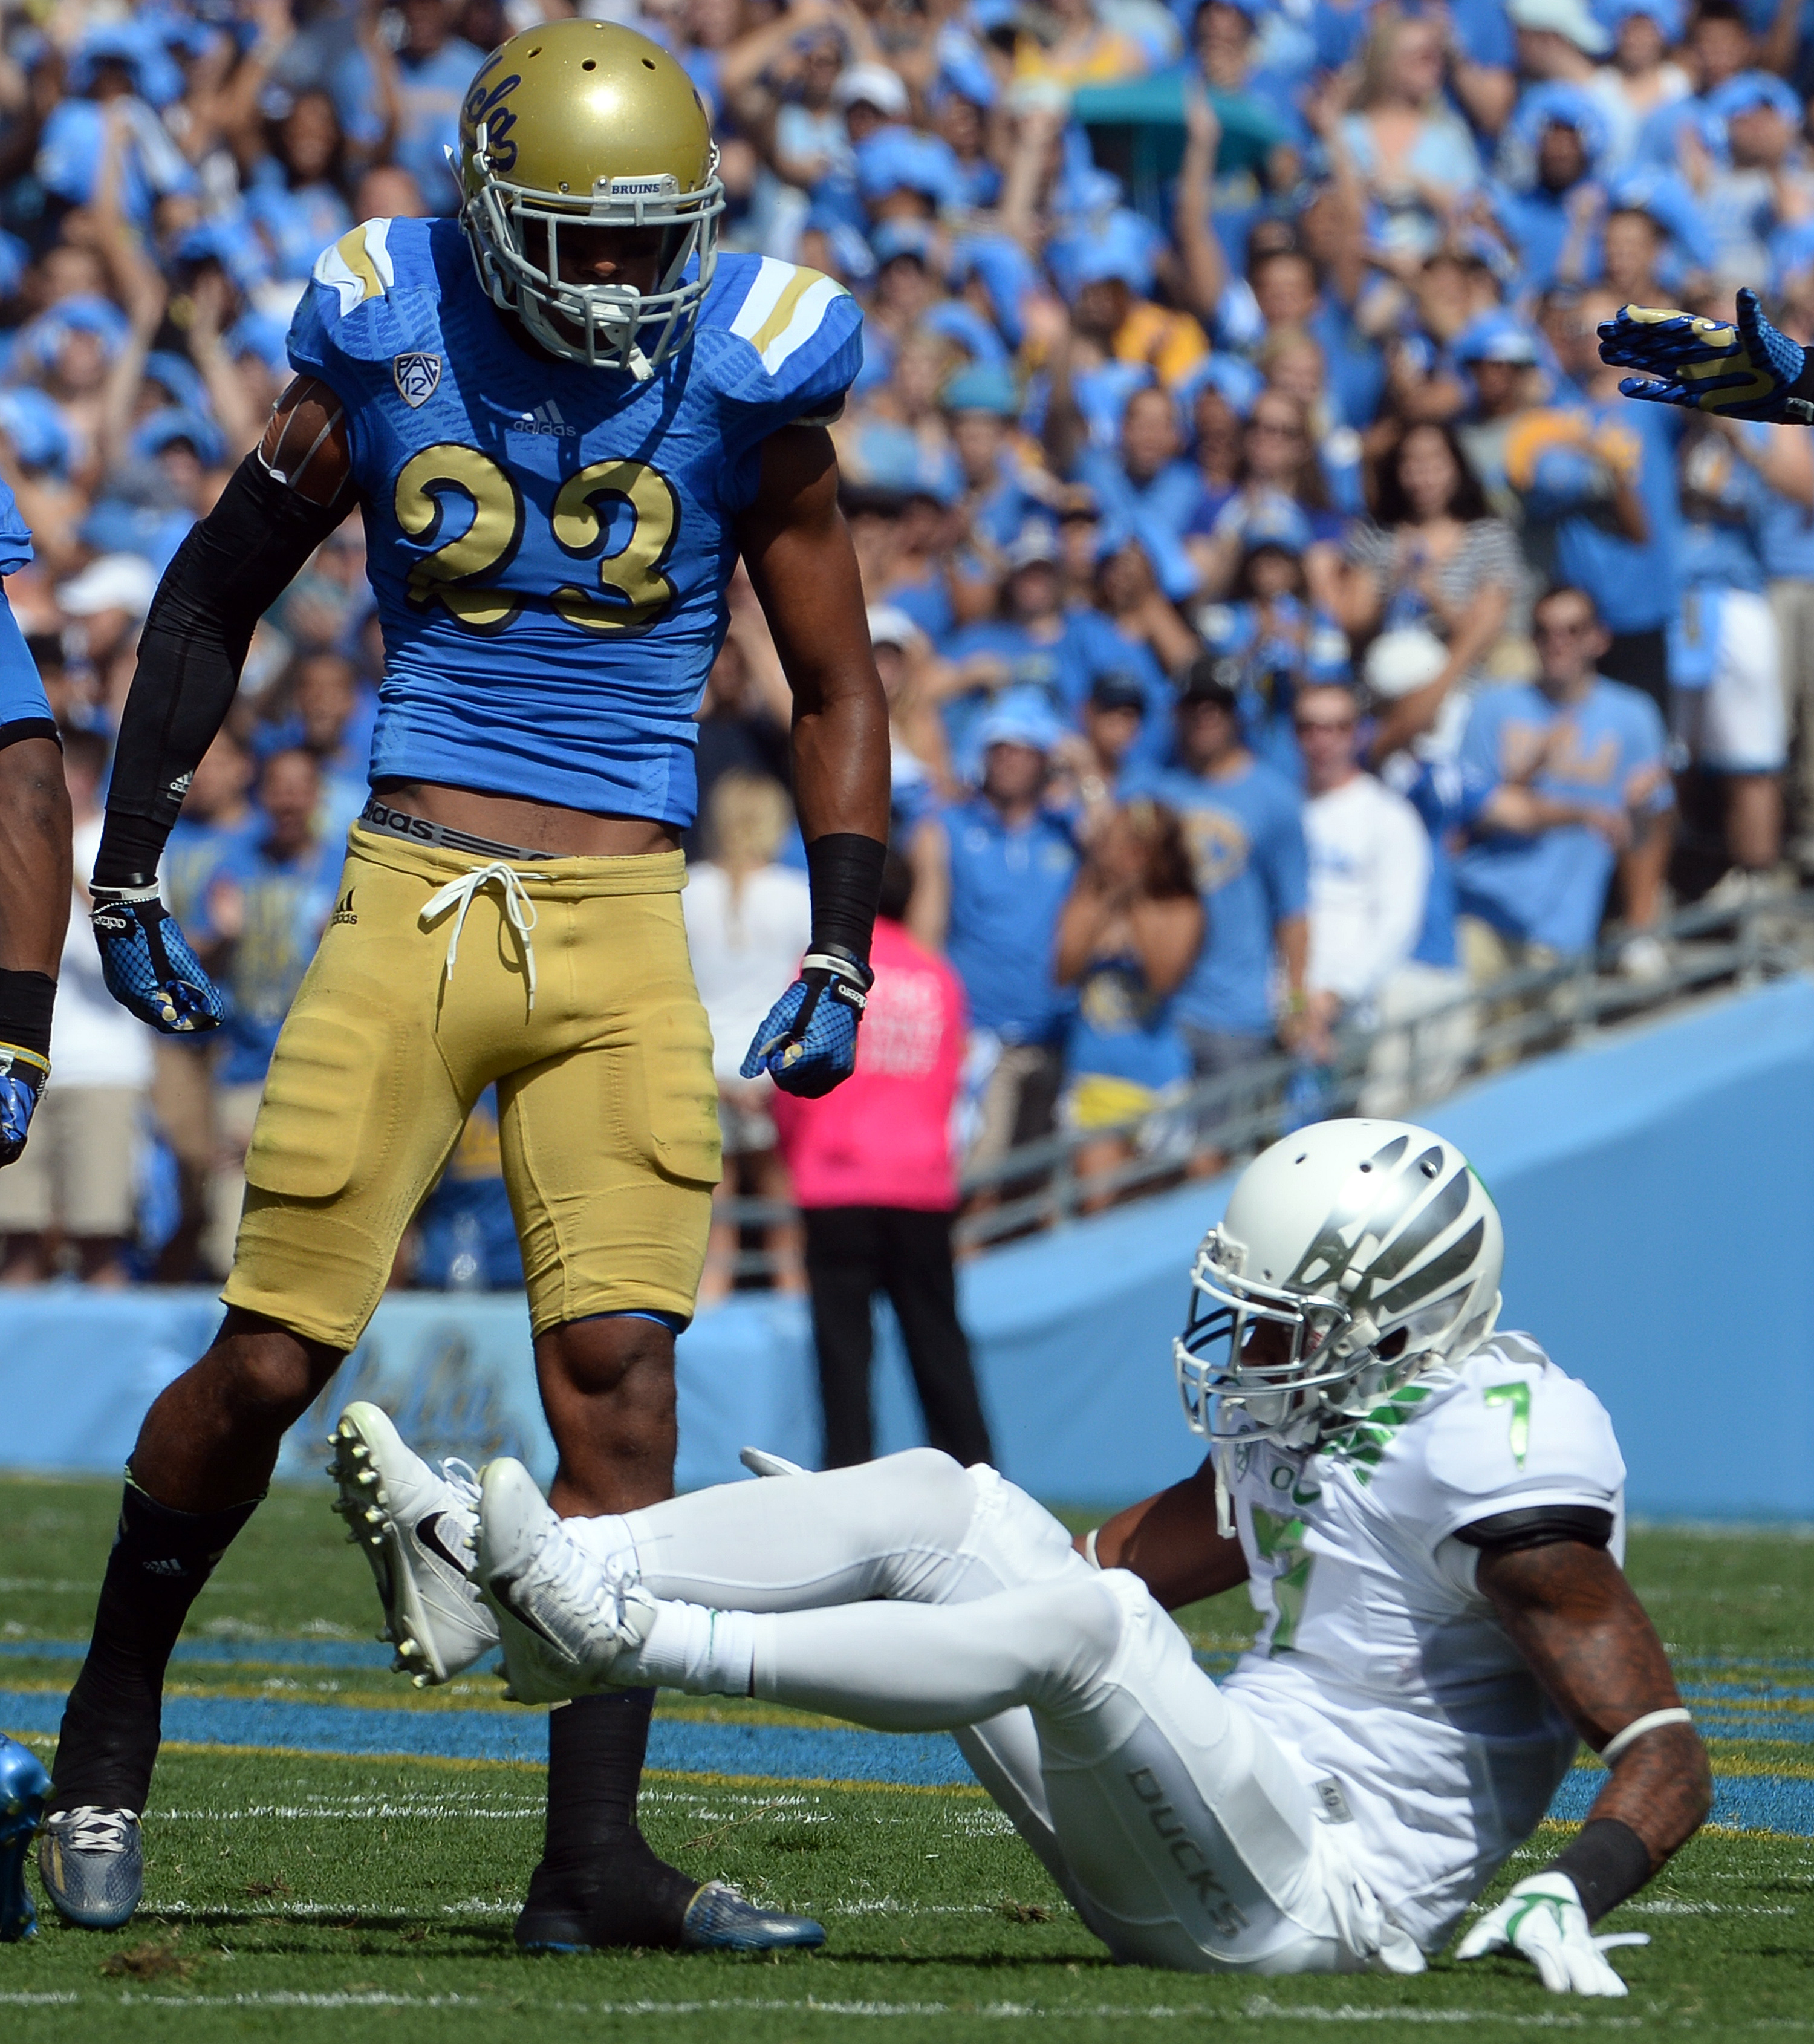 UCLA defensive back Anthony Jefferson stands over Oregon receiver Keanon Lowe after making a tackle at the Rose Bowl during the Bruins' 42-30 loss on Oct. 11, 2014. (Keith Birmingham/Staff)